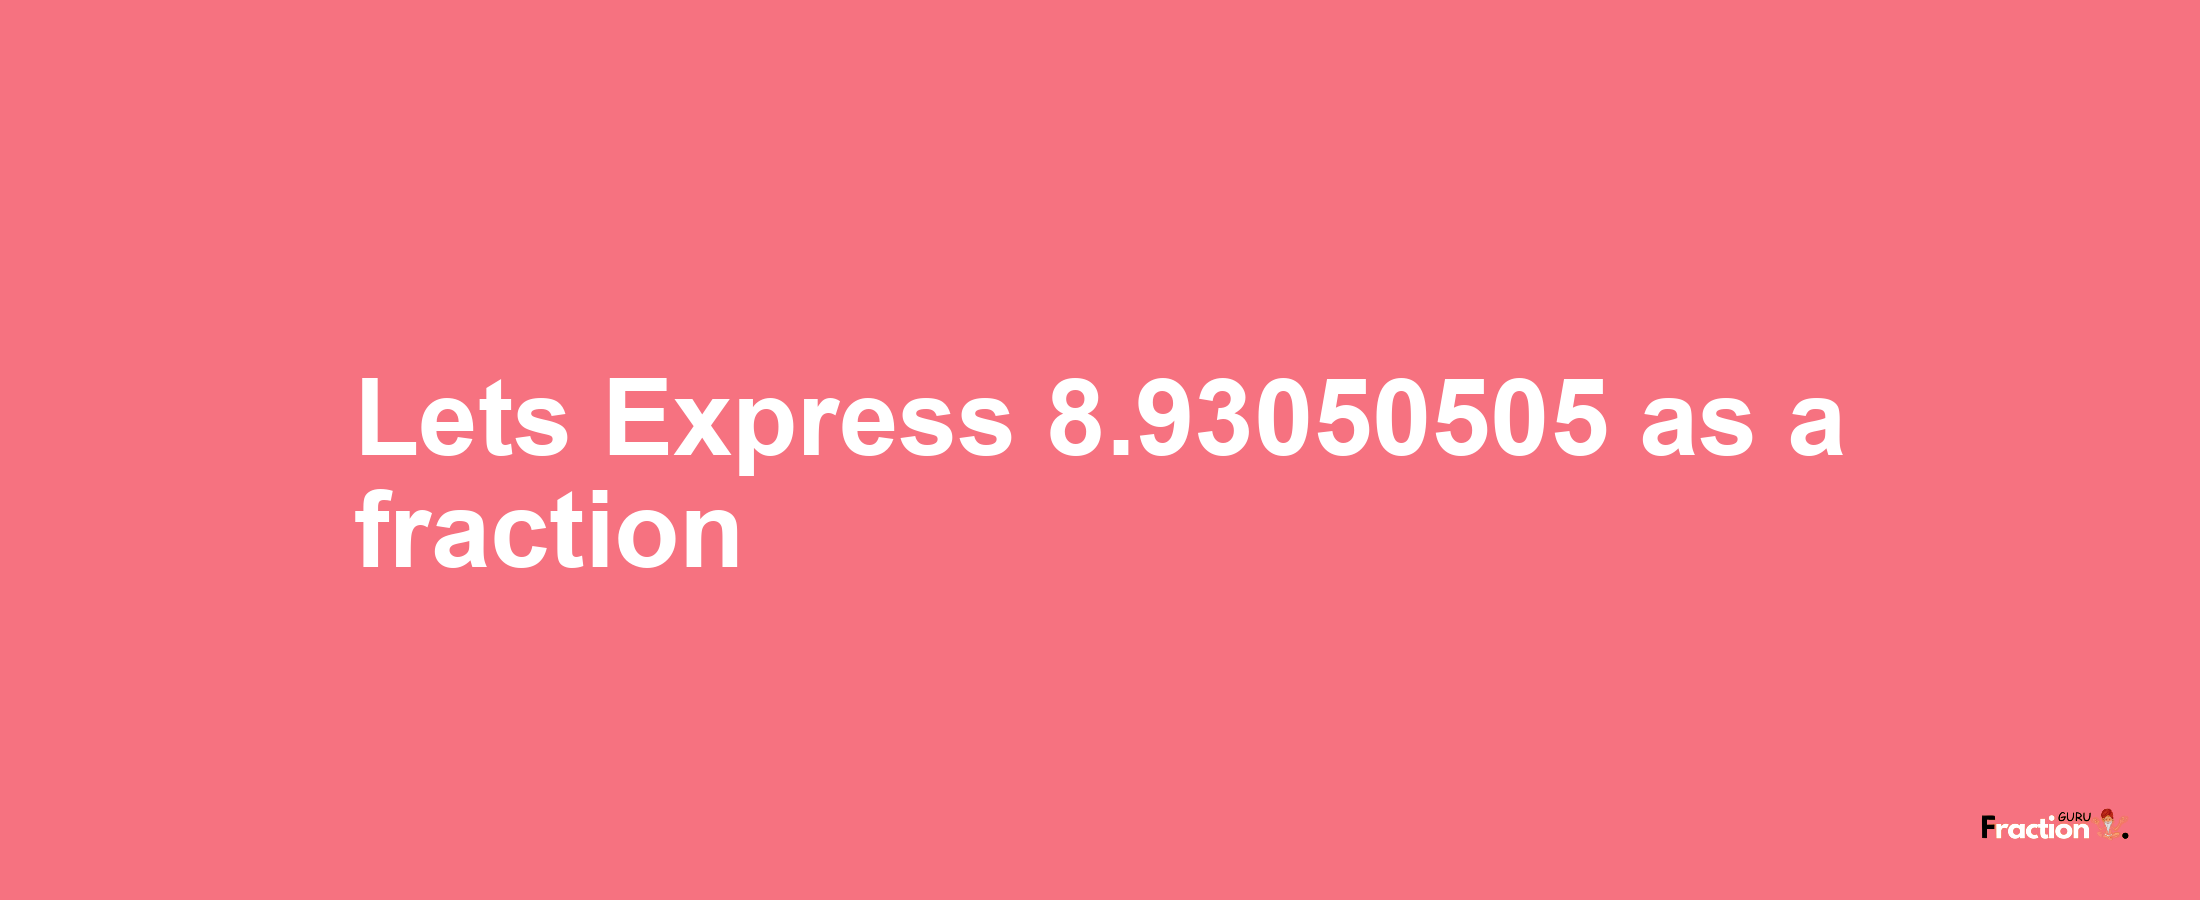 Lets Express 8.93050505 as afraction